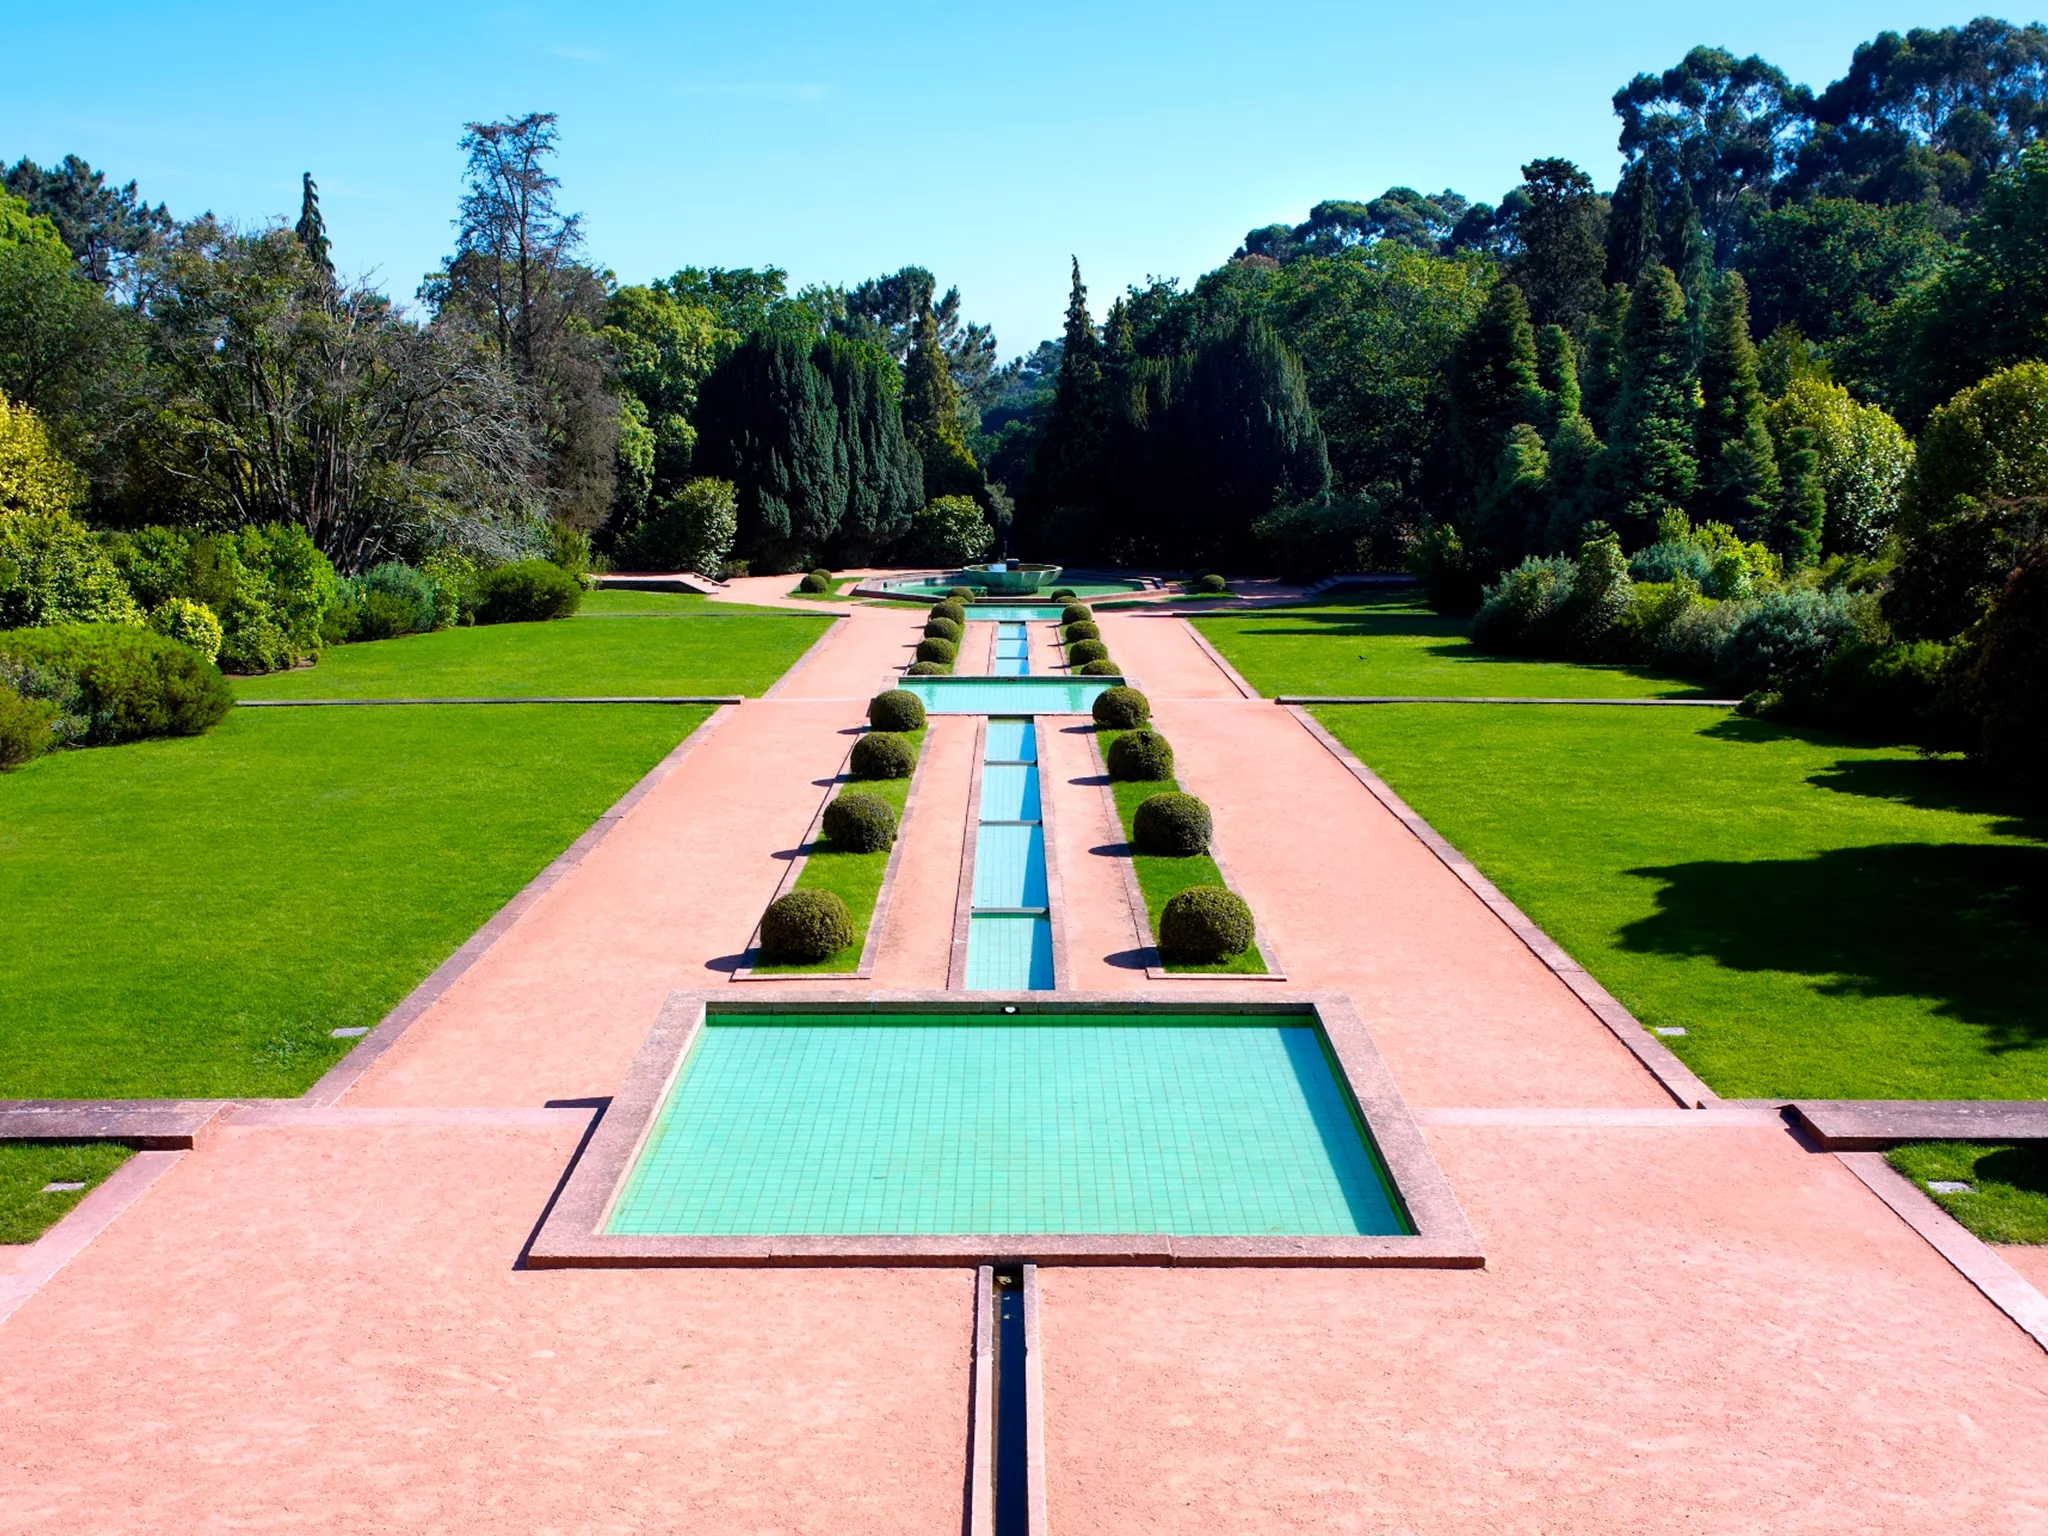 Serralves in Portugal, Europe | Parks - Rated 3.9